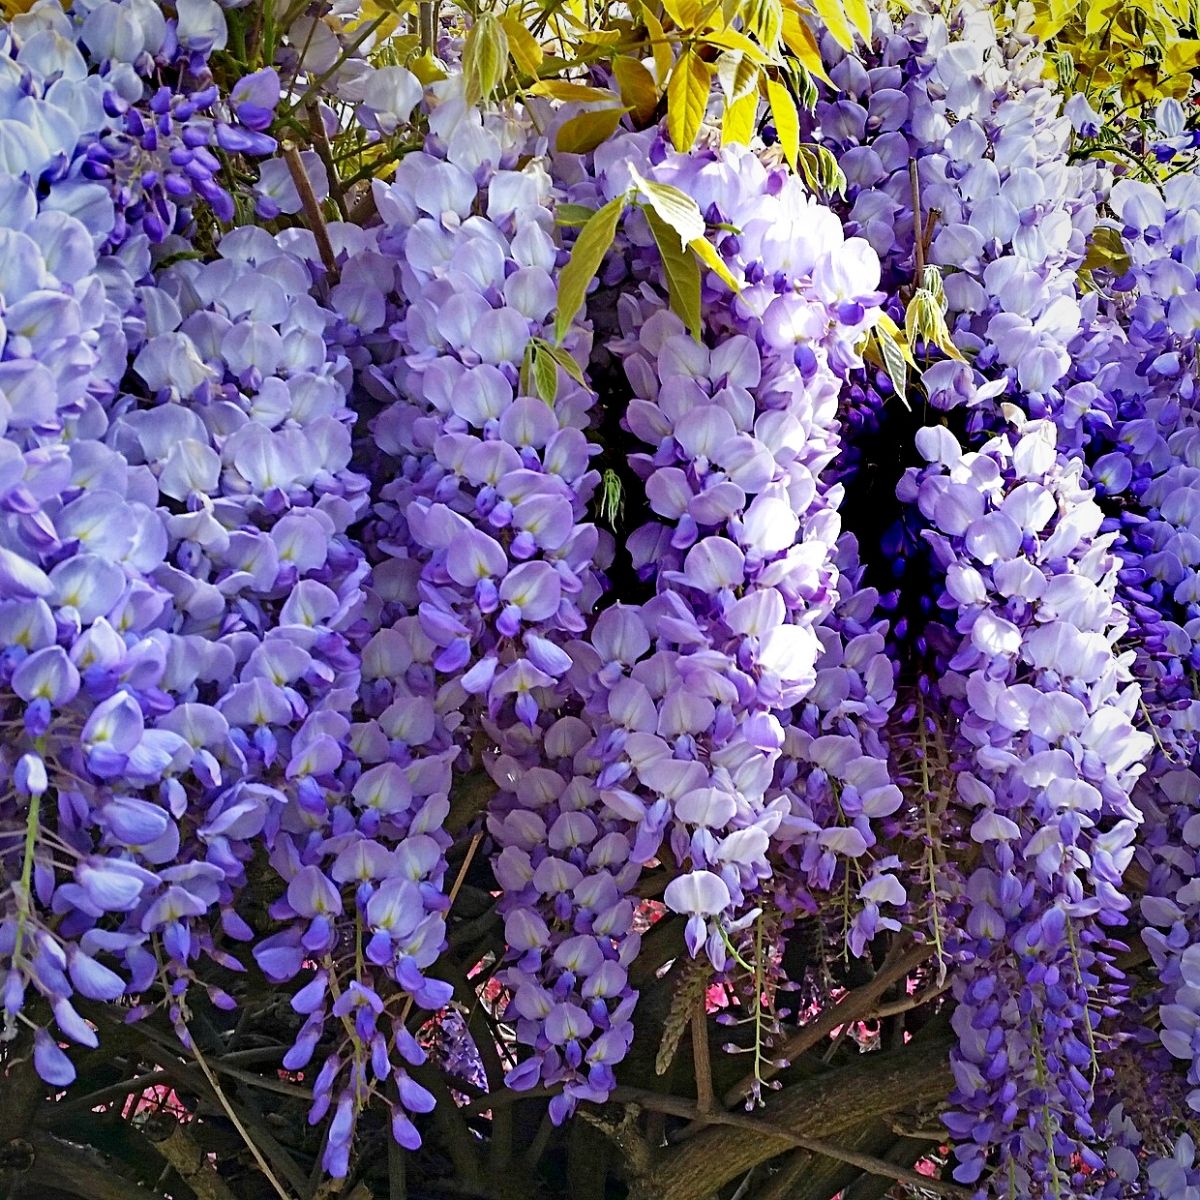 A bloom of wisteria flowers